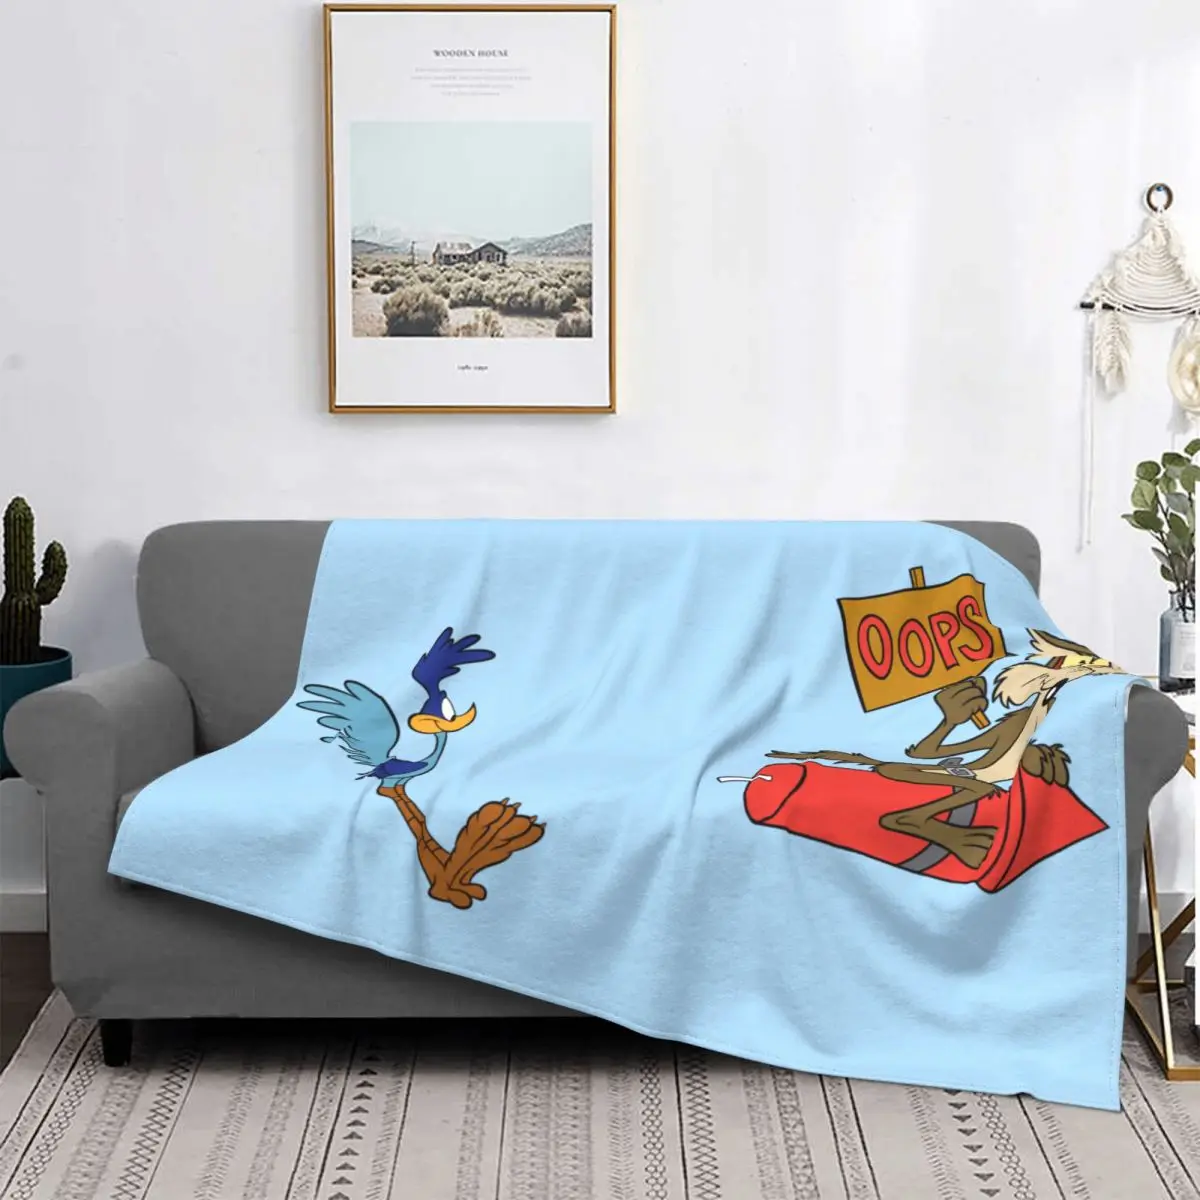 

Road Runner Wile E Coyote Cartoon Blankets Flannel Funny Soft Throw Blankets for Bed Sofa All Season